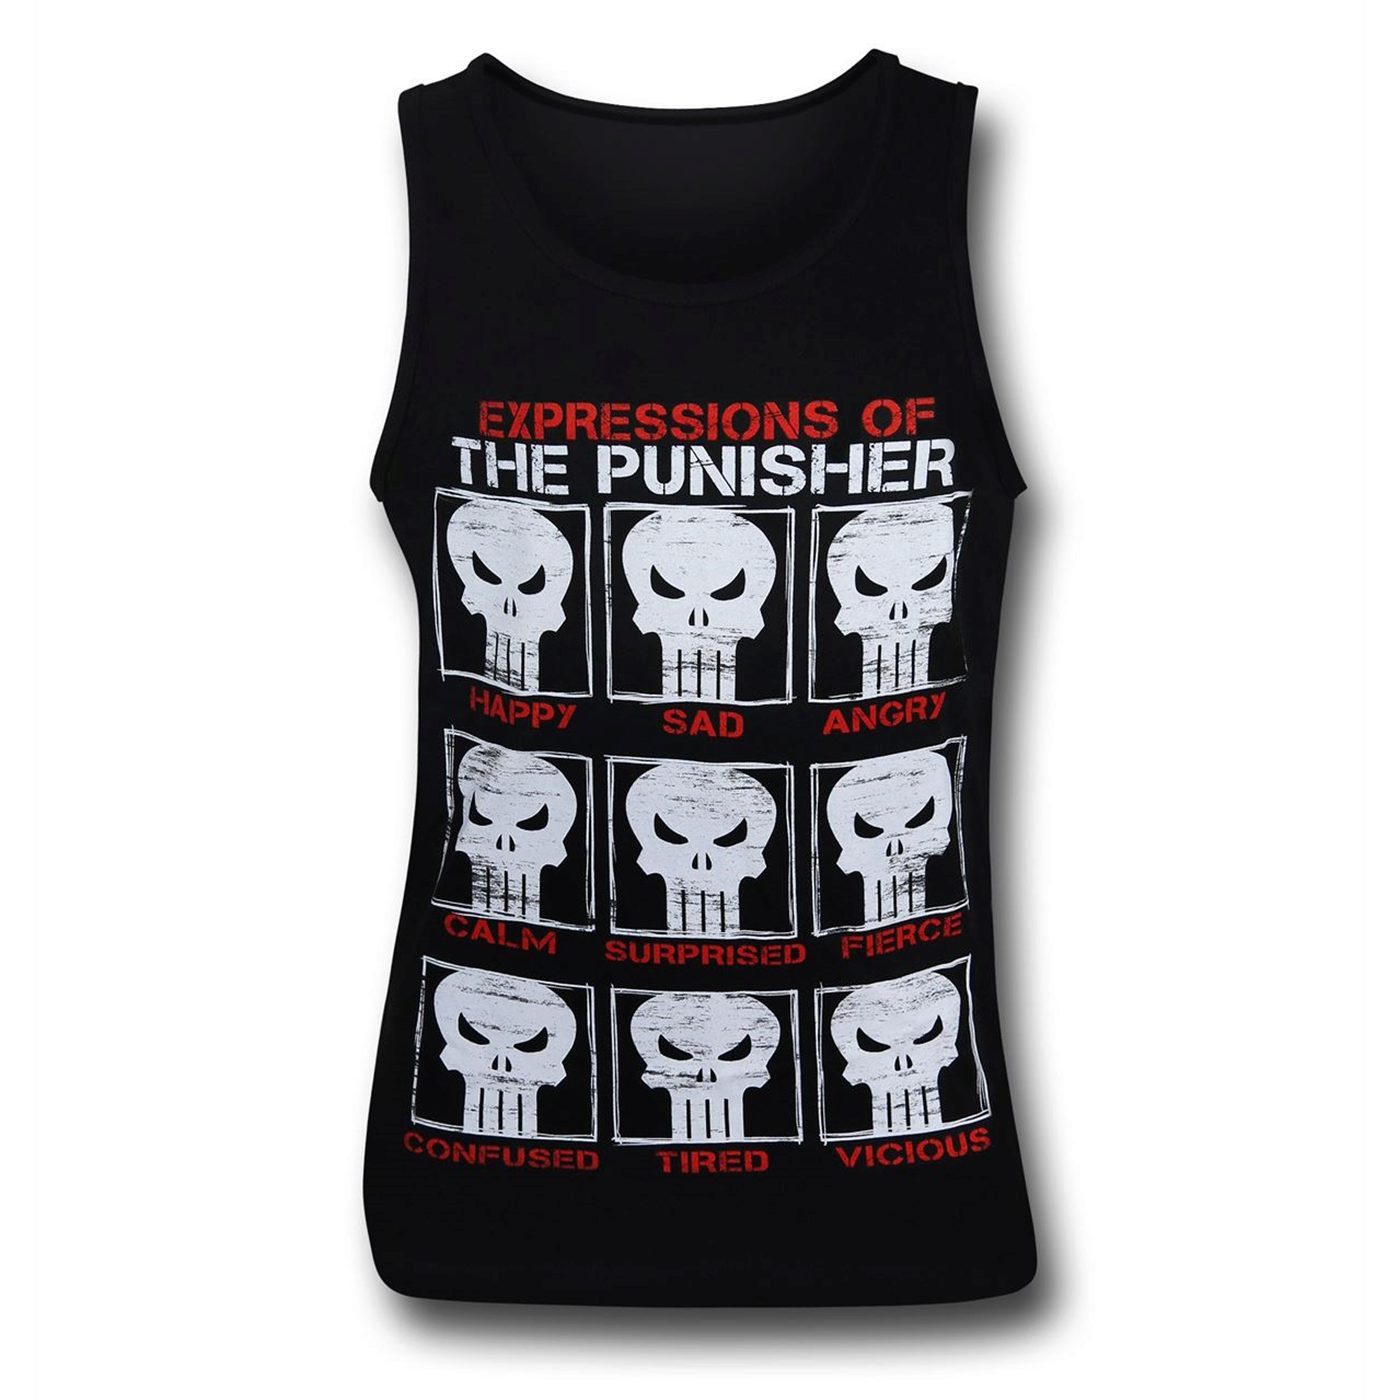 Punisher Expressions of the Punisher Men's Tank Top